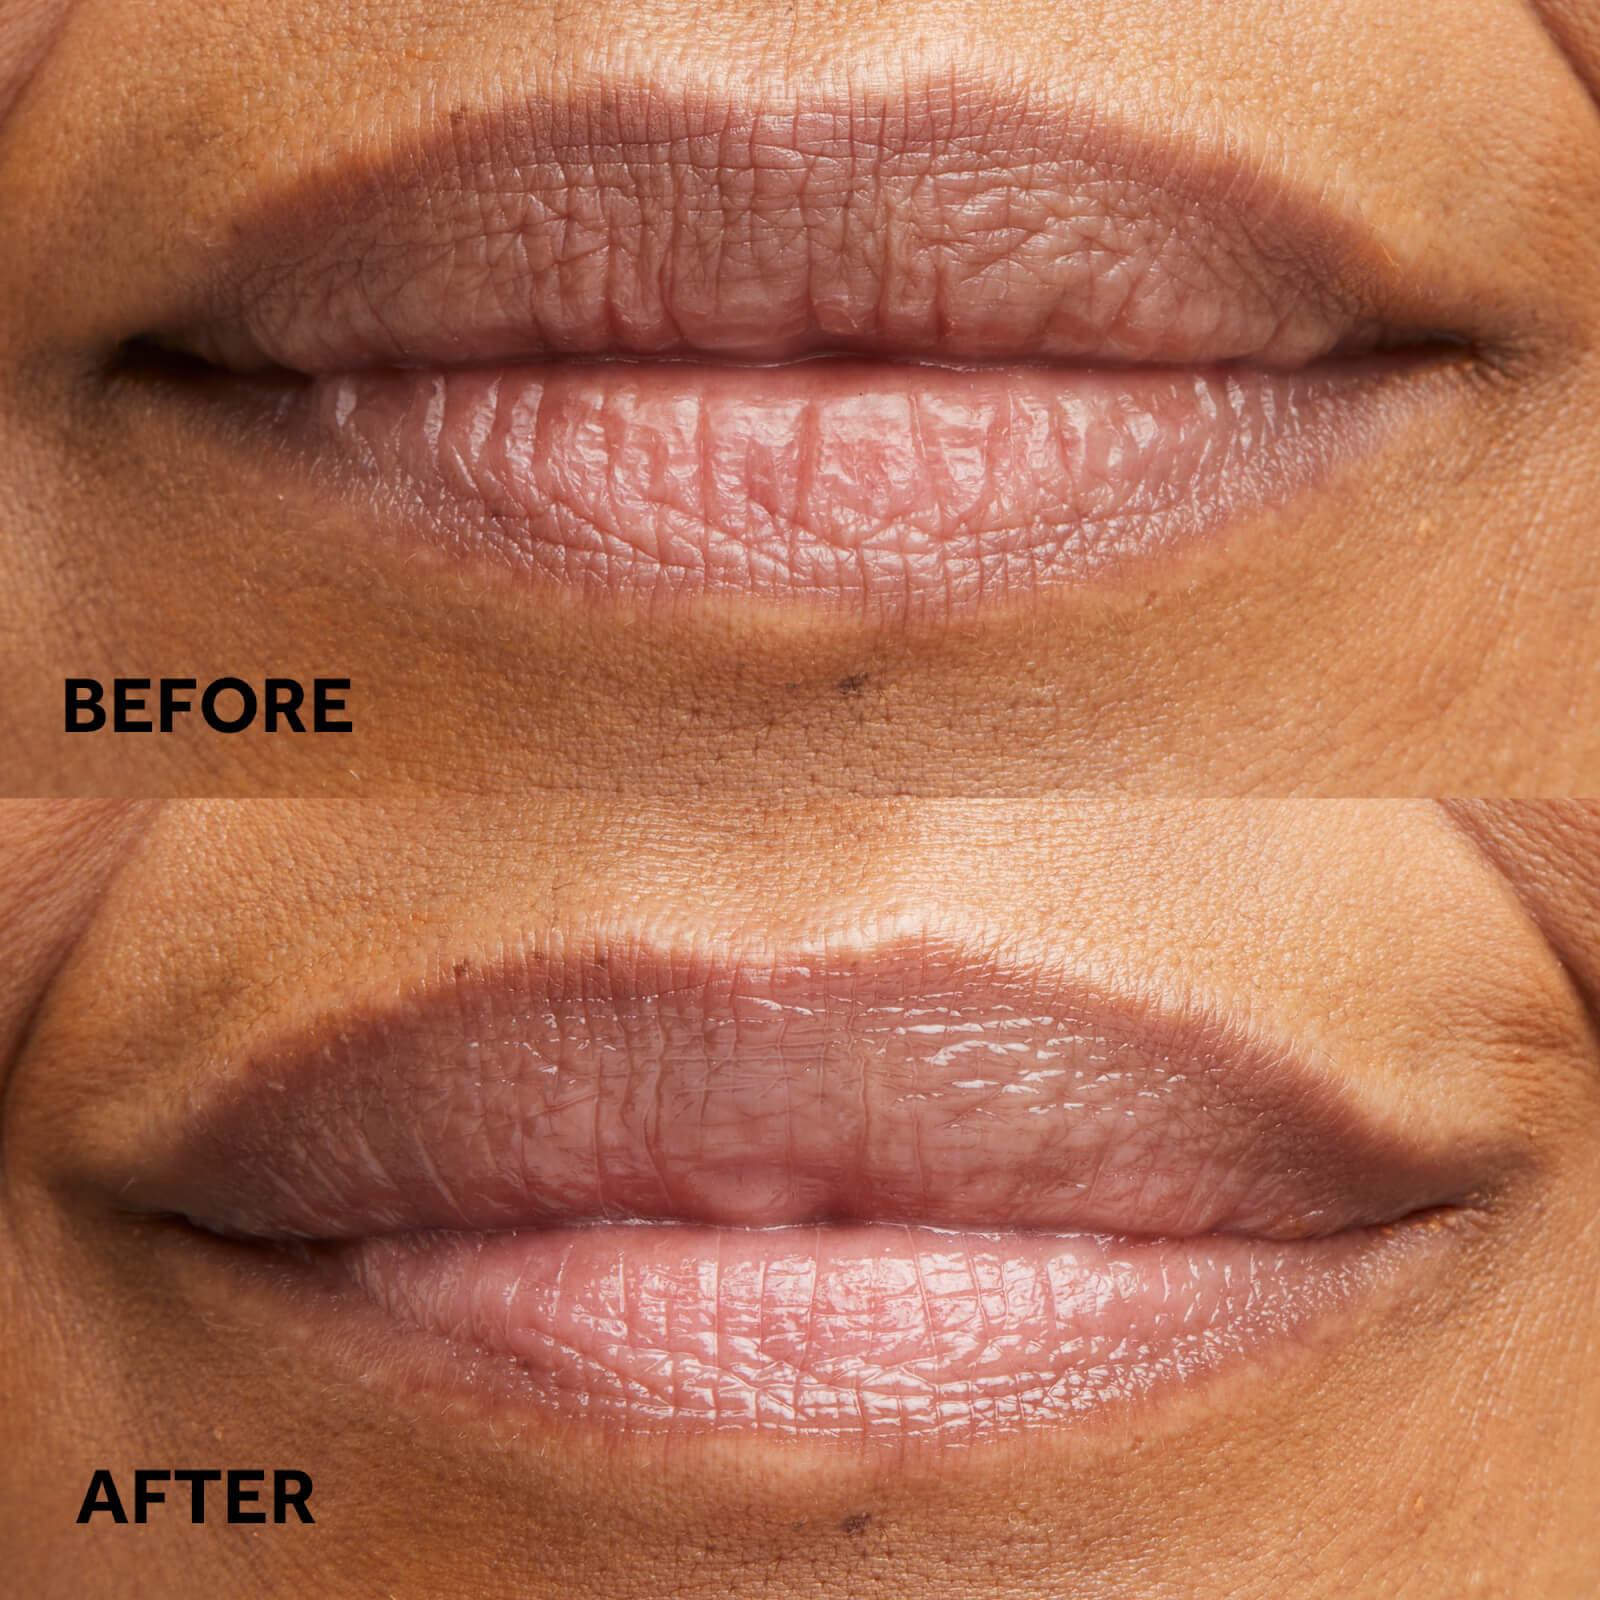 Before, After the lip treatment